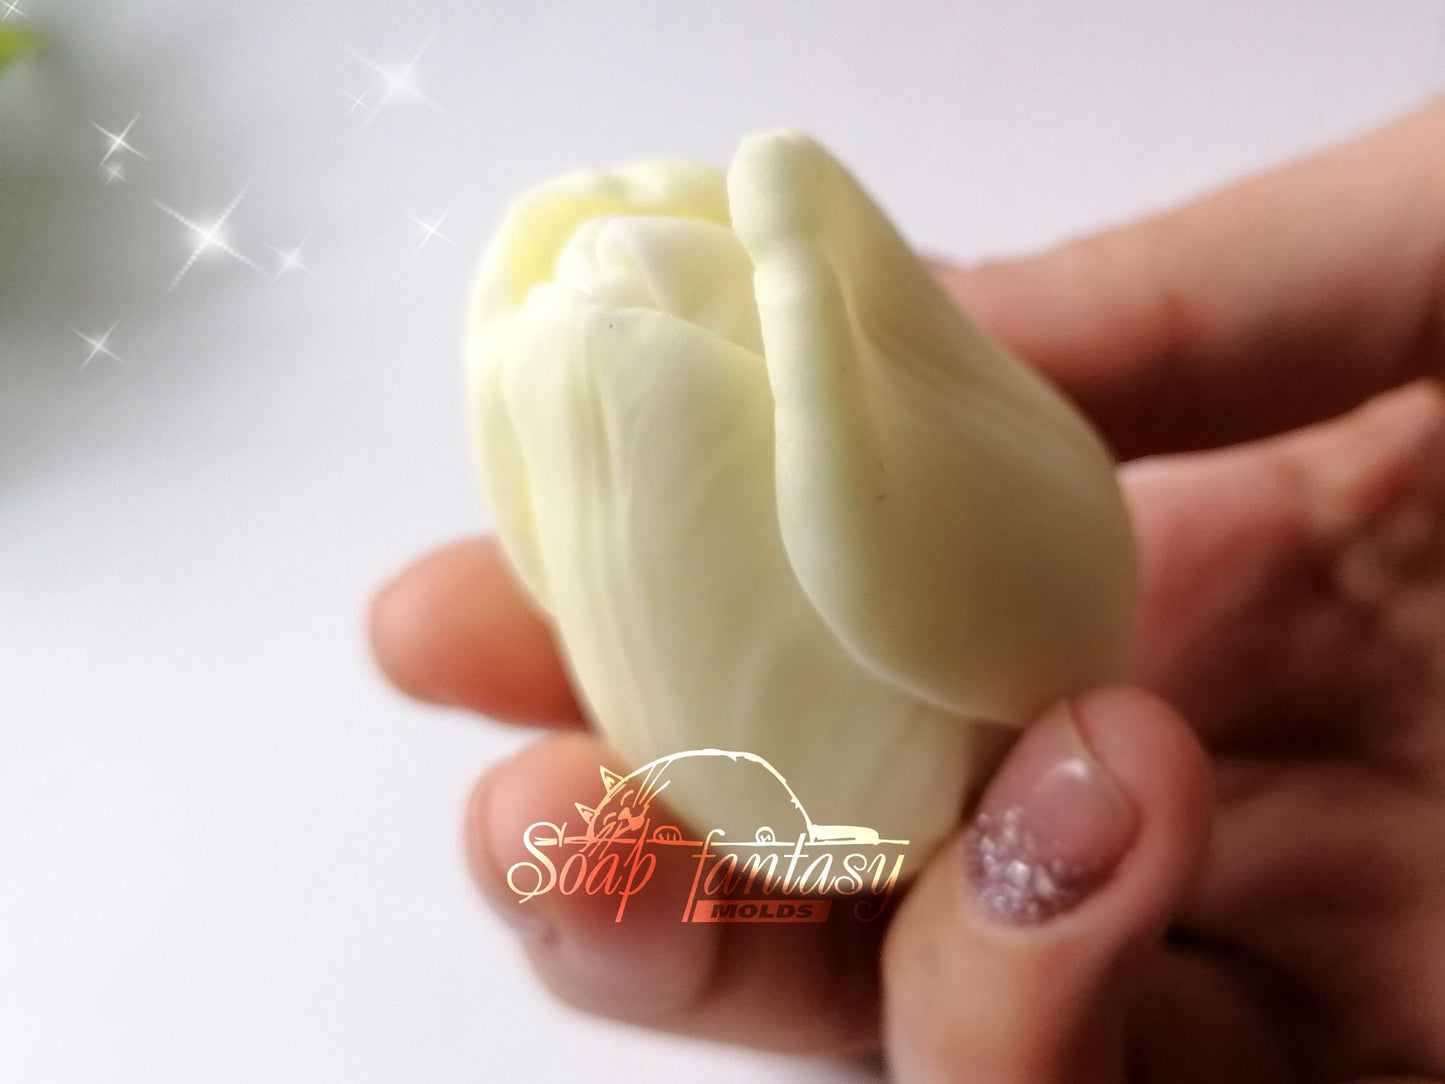 Tulip "Duchess" silicone mold for soap making